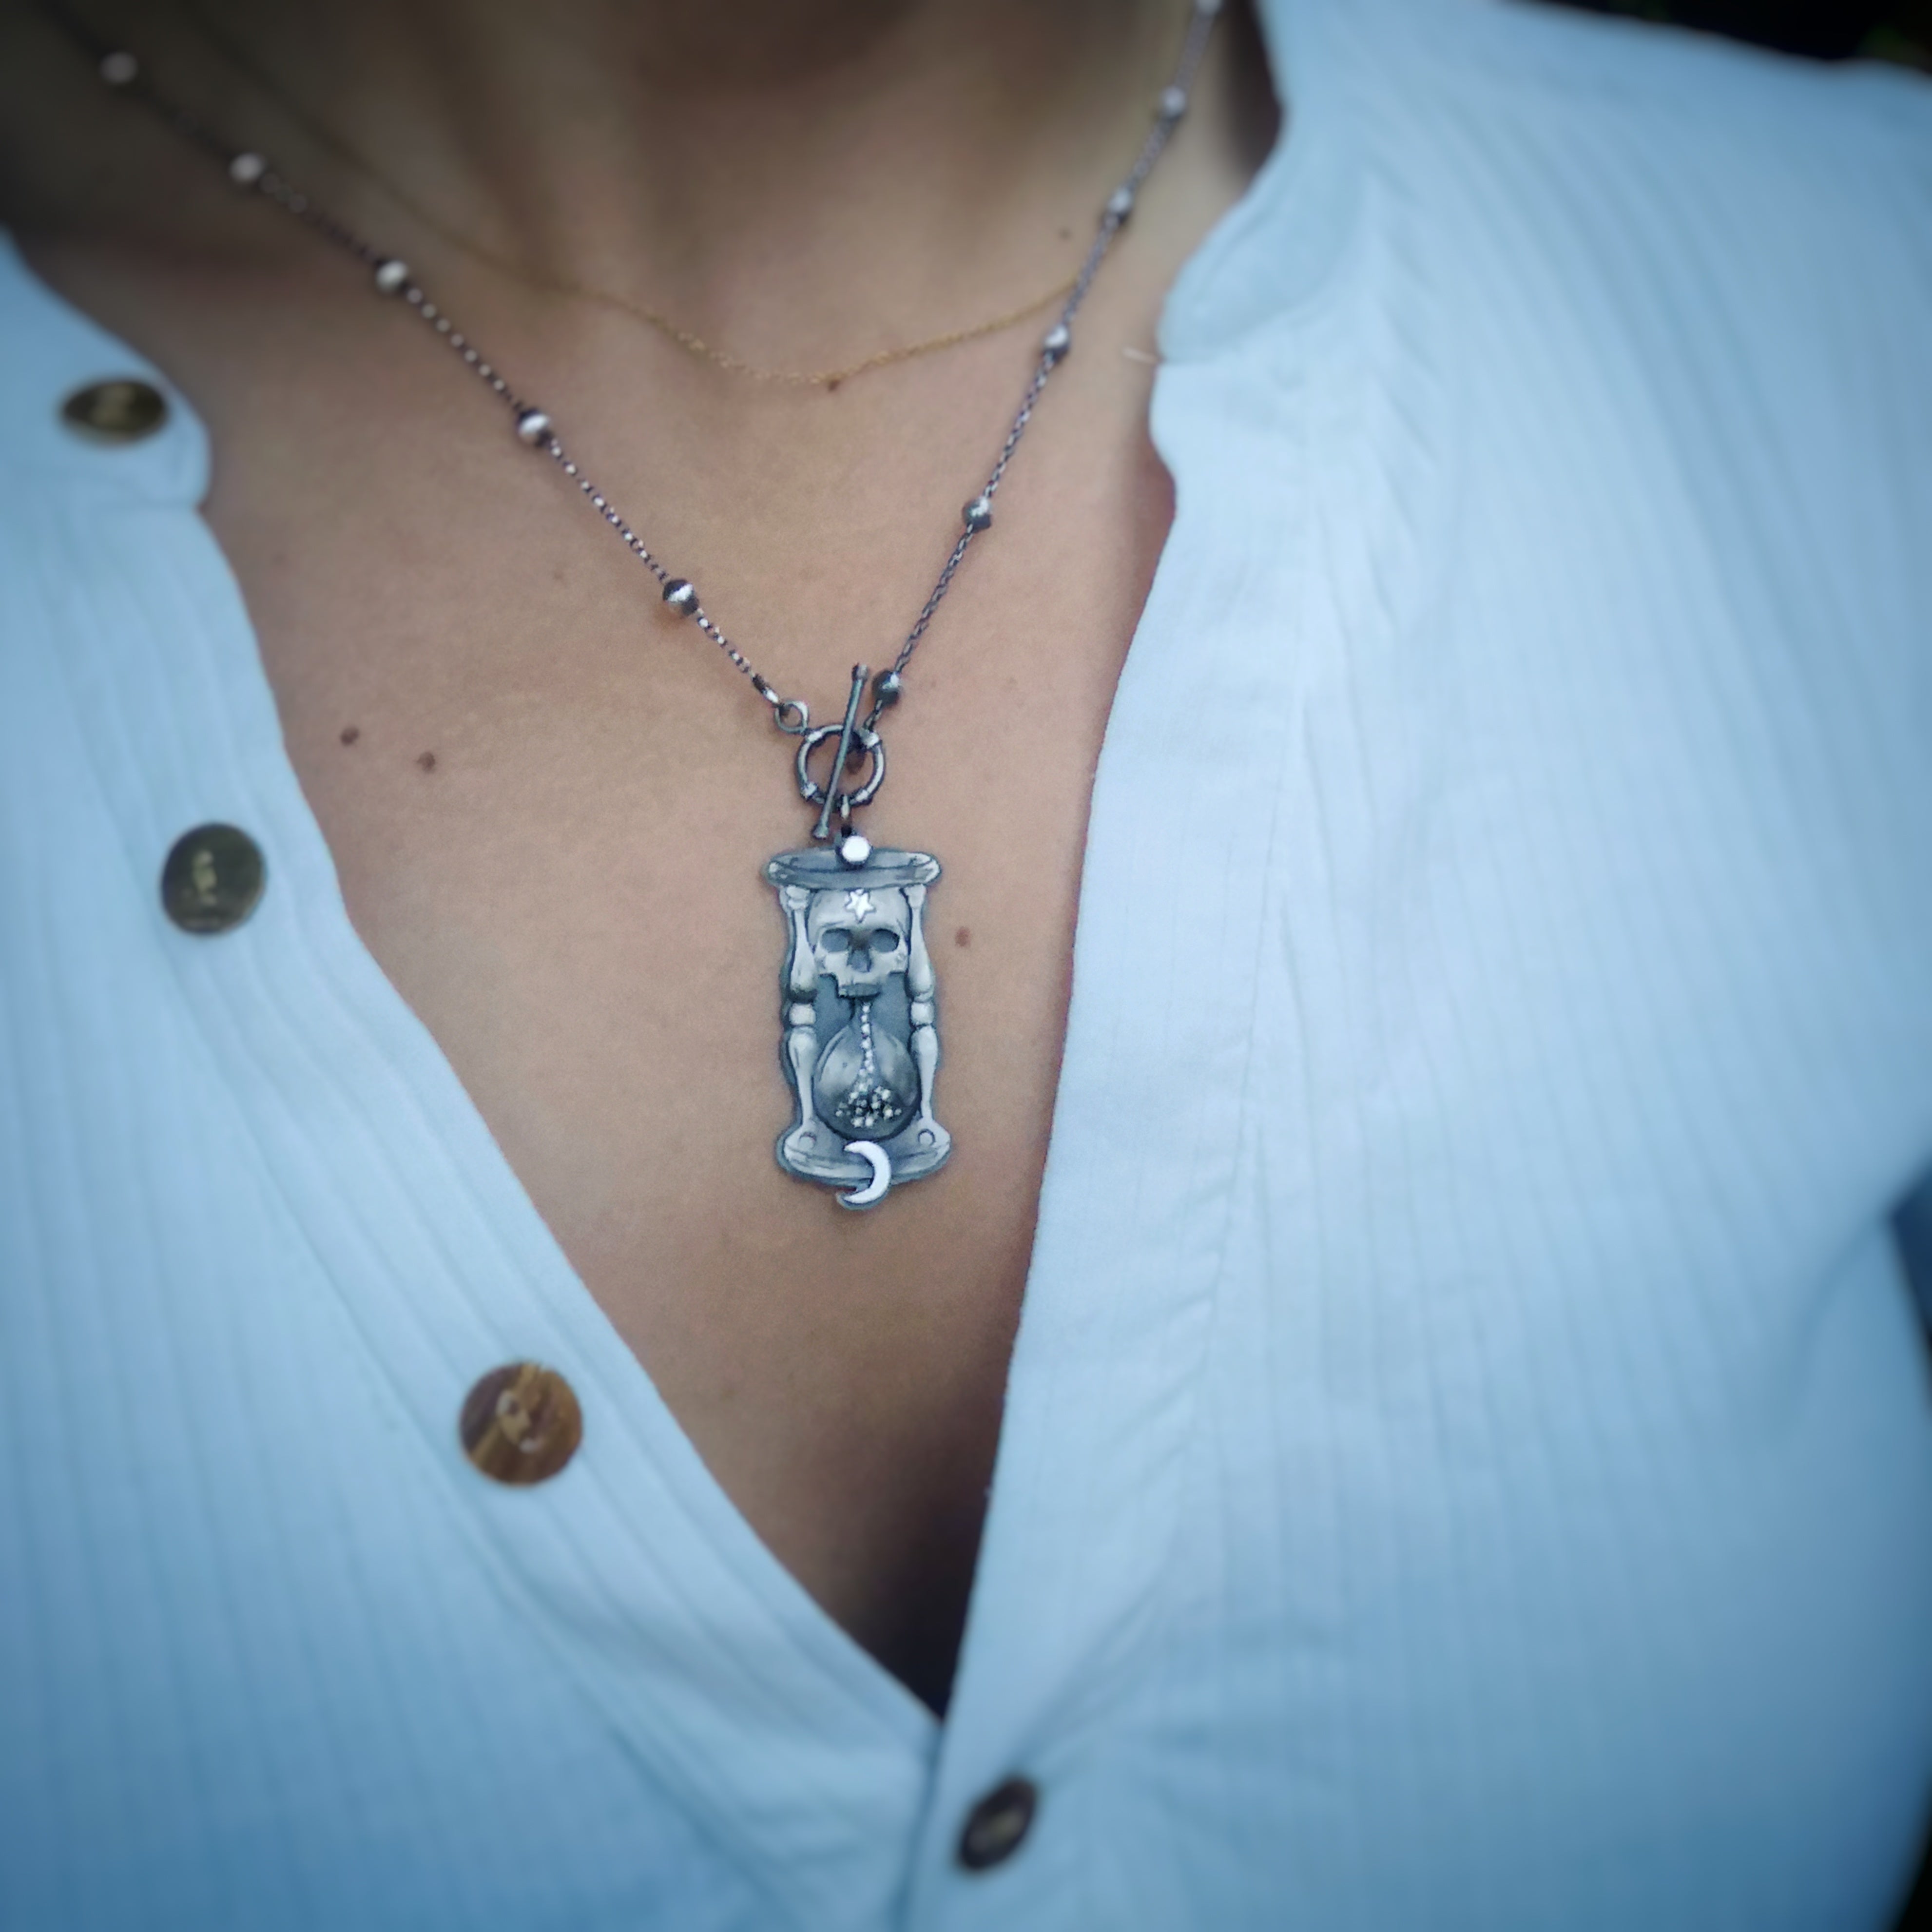 The Hourglass Necklace